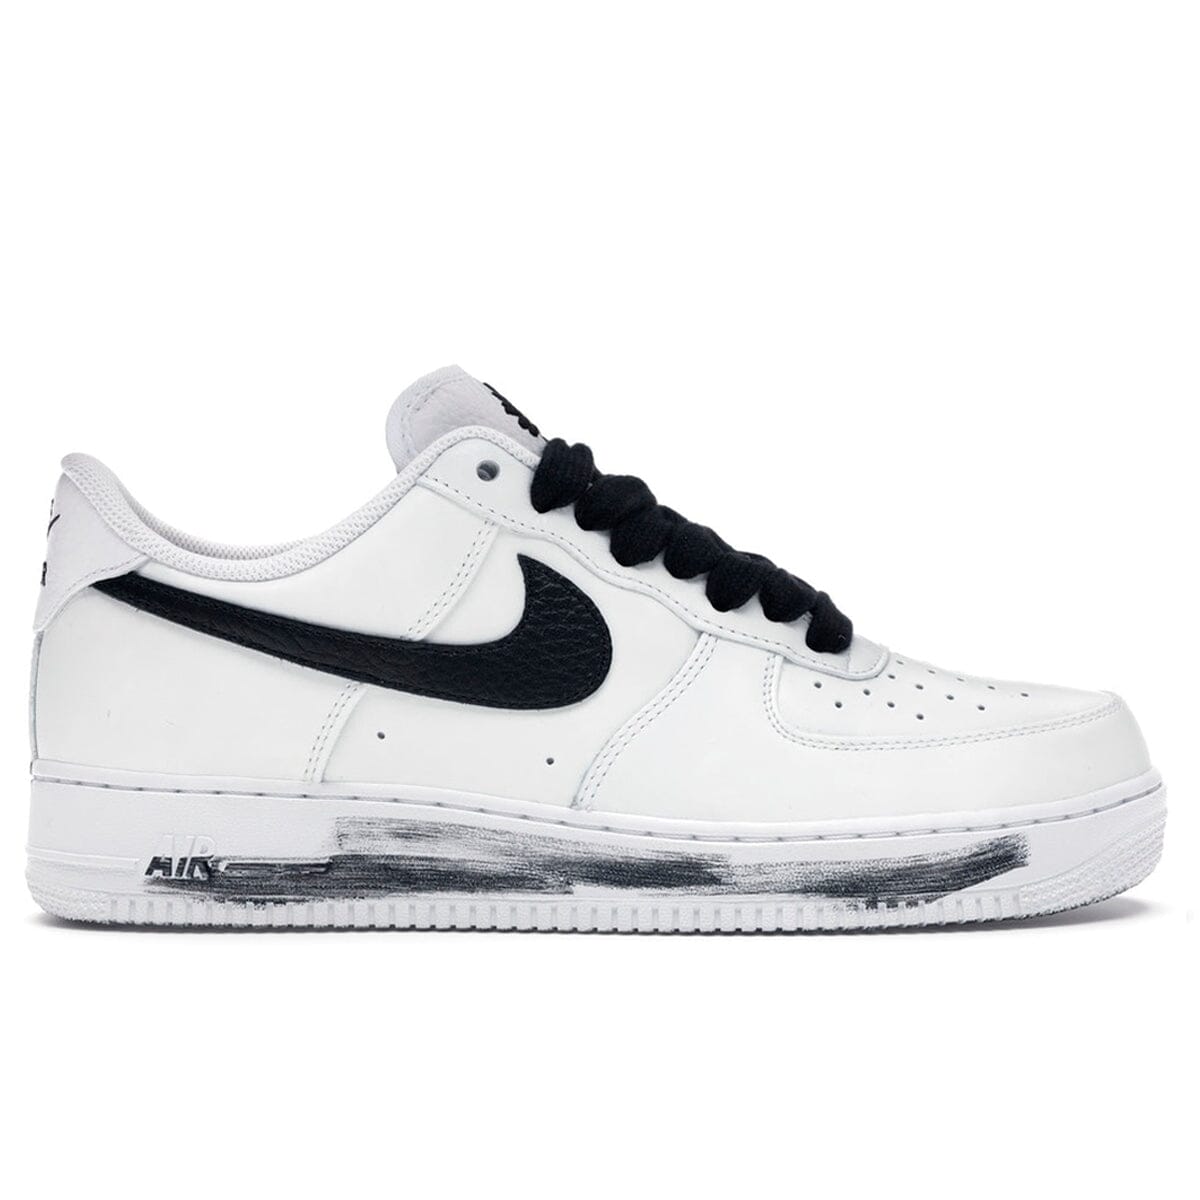 Nike Air Force 1 Low G-Dragon Peaceminusone Para-Noise 2.0 Air Force 1 Blizz Sneakers 